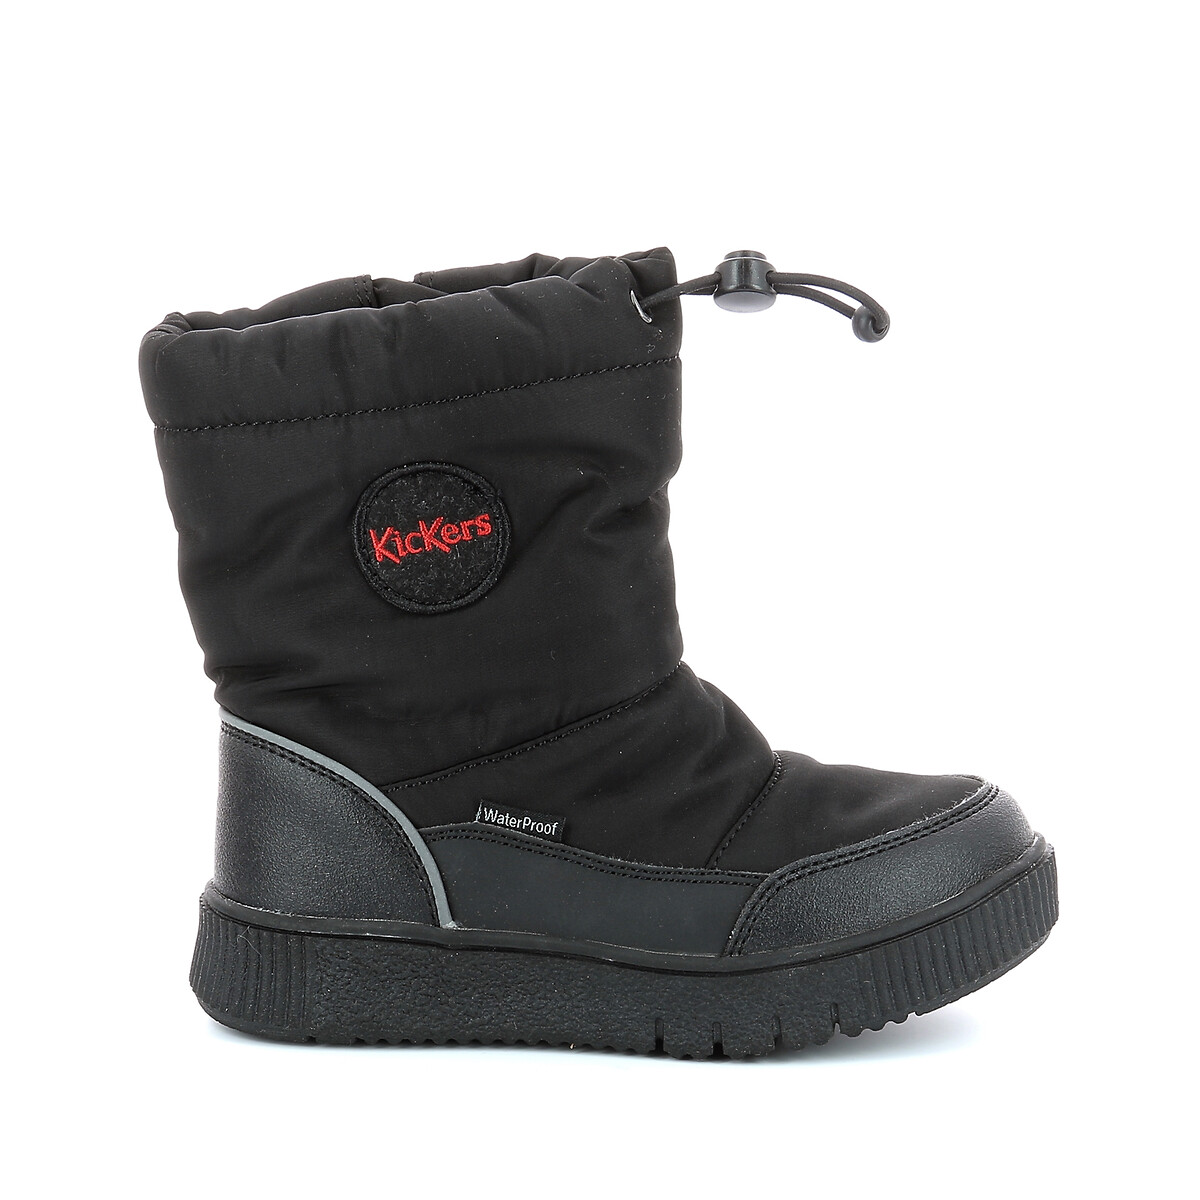 Kids Atlak Ankle Boots with Faux Fur Lining